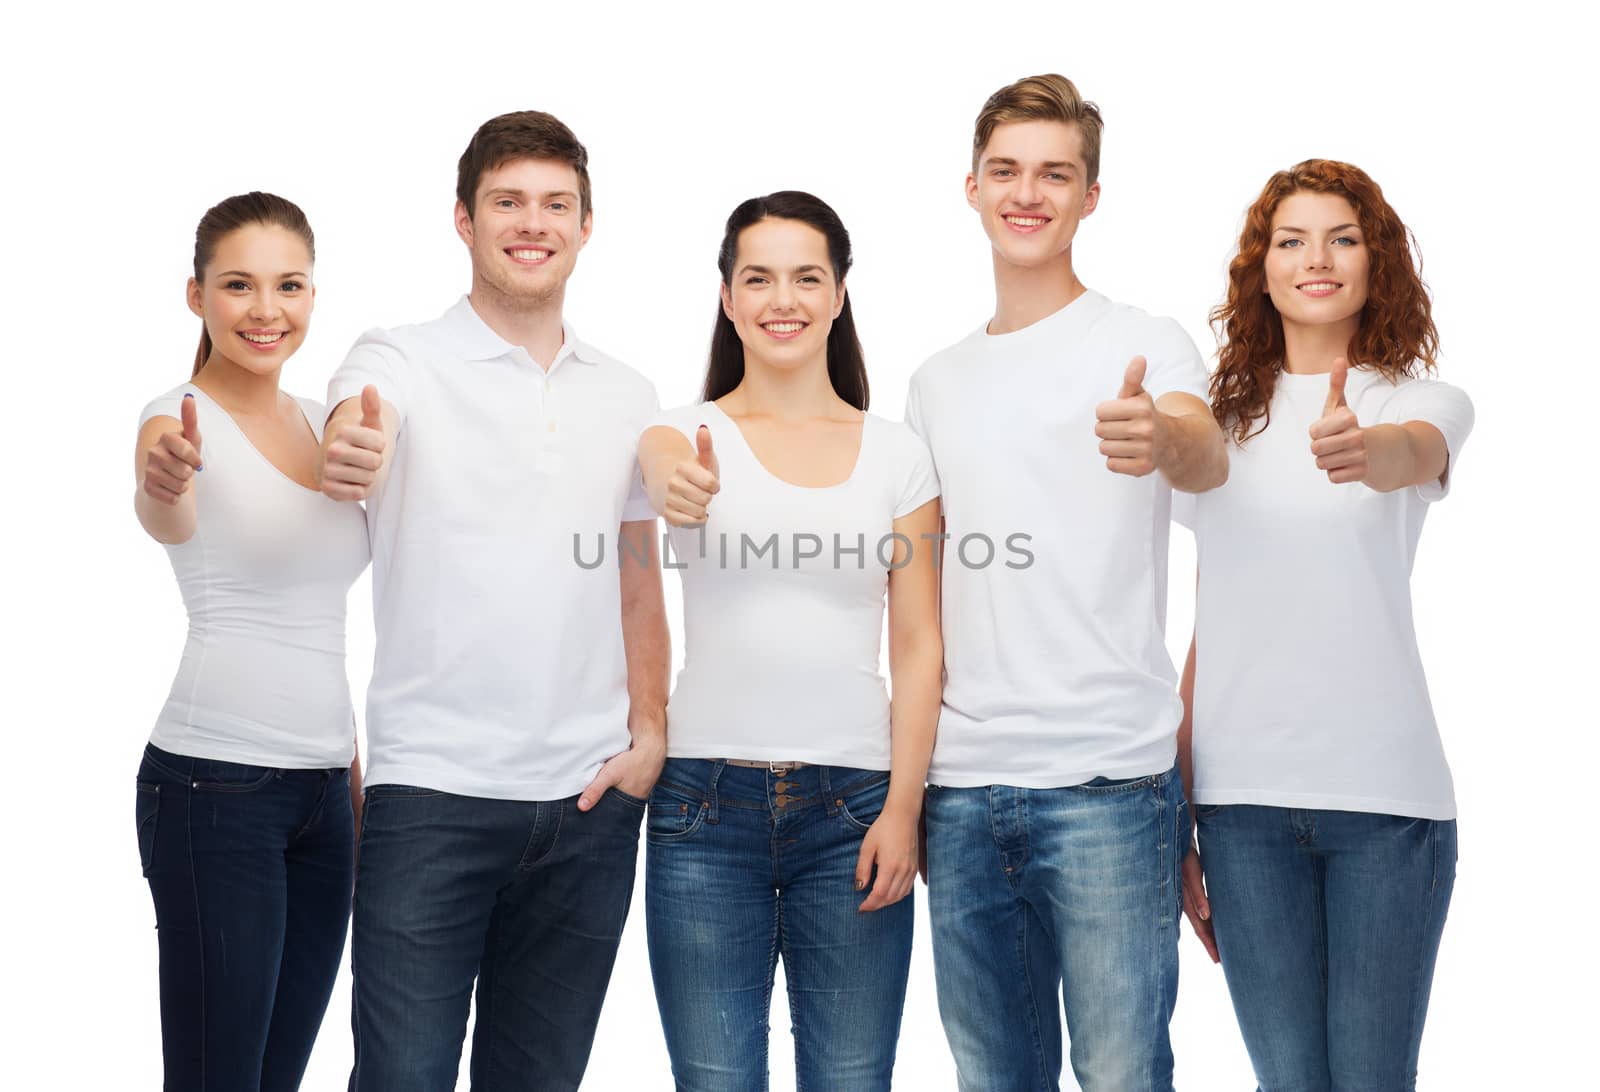 t-shirt design, gesture and people concept - group of smiling teenagers in blank white t-shirts showing thumbs up